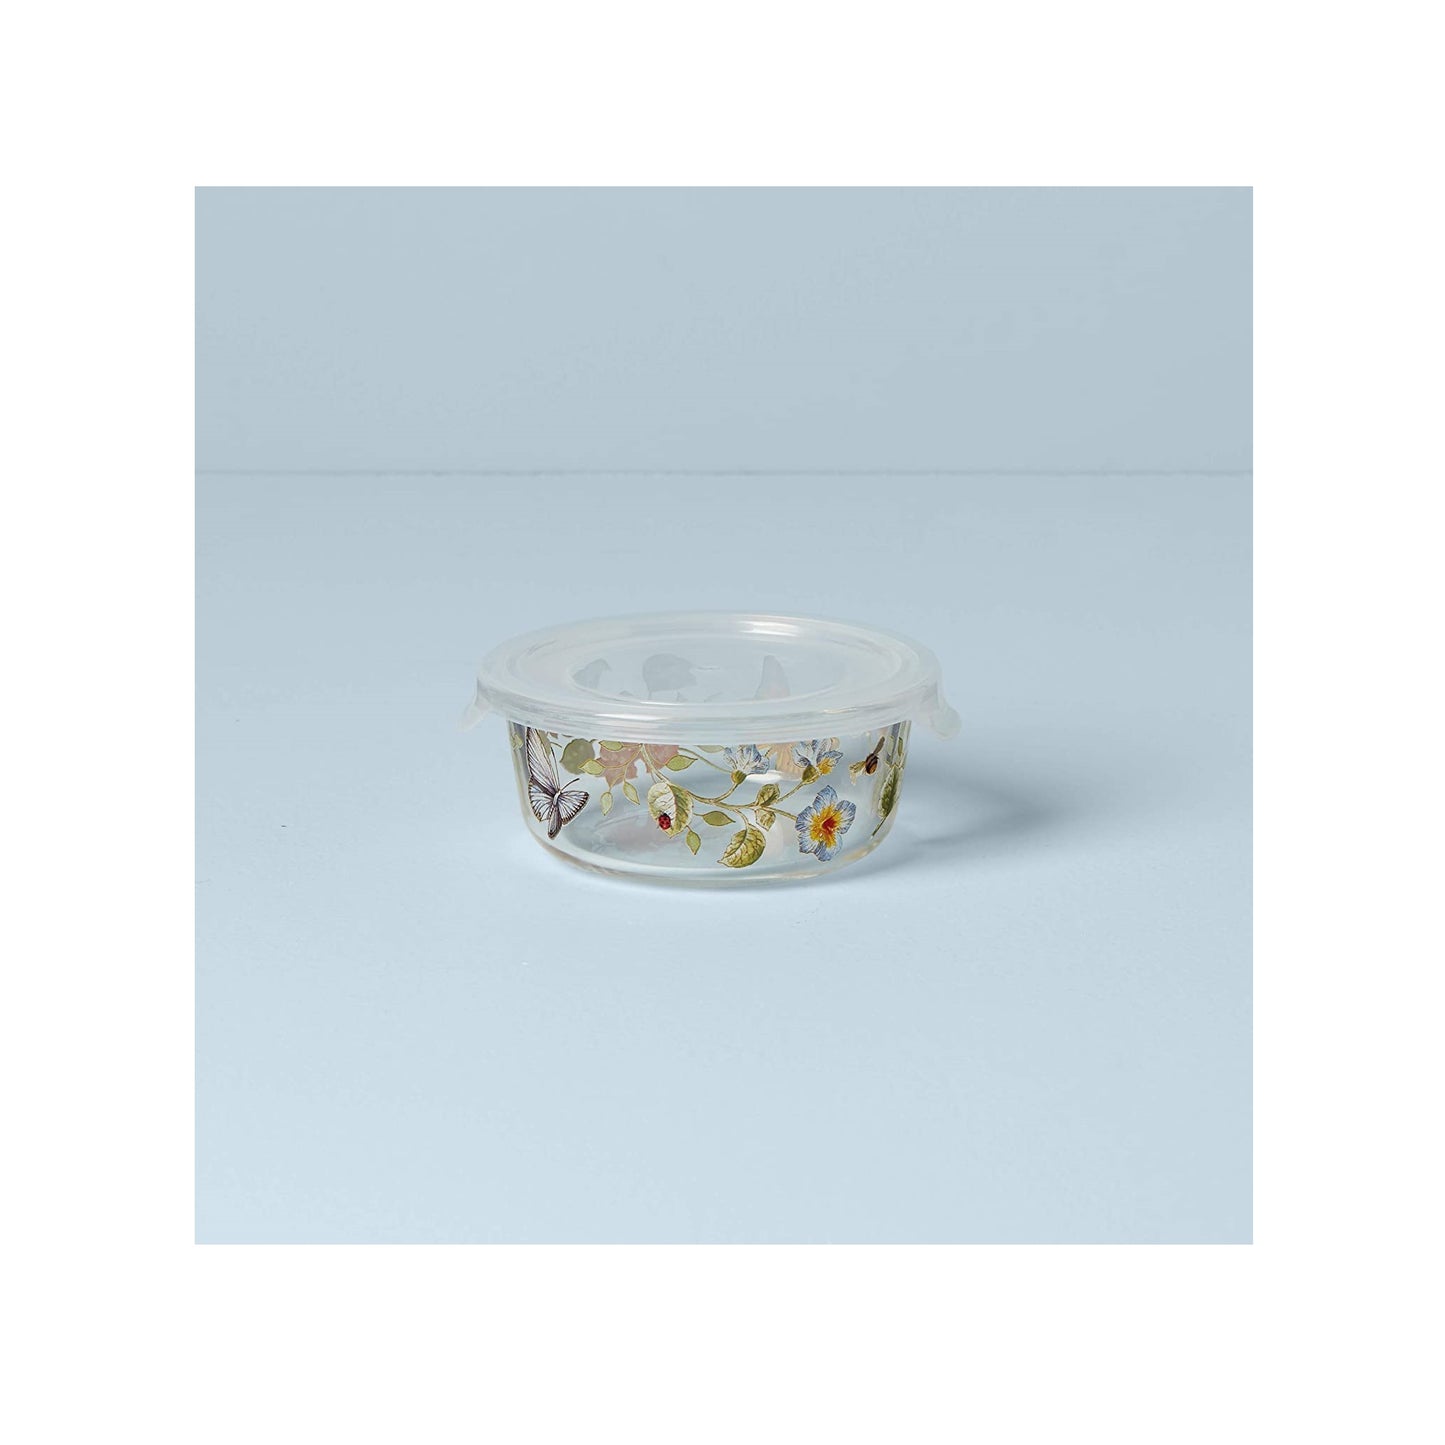 Butterfly Meadow Round Food Storage Container with Lid by Lenox